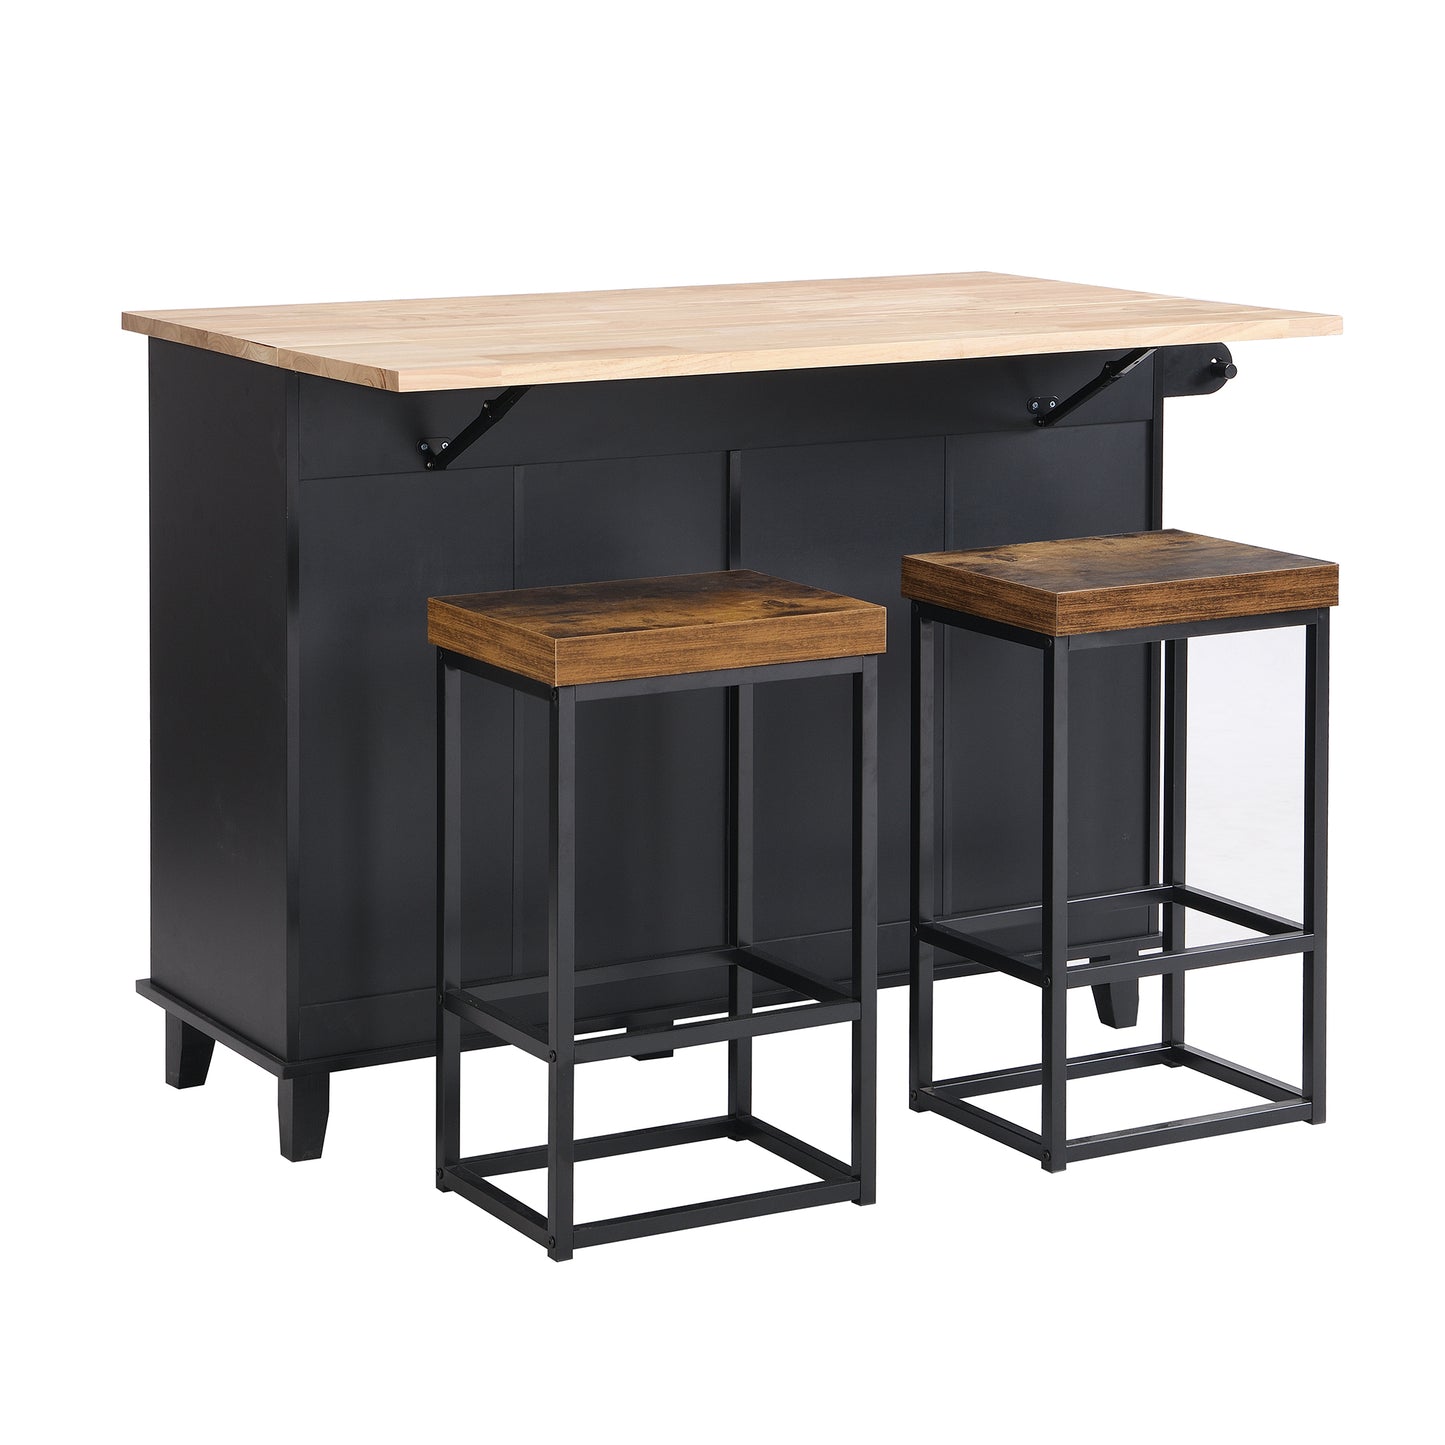 TOPMAX Farmhouse Kitchen Island Set with Drop Leaf and 2 Seatings,Dining Table Set with Storage Cabinet, Drawers and Towel Rack, Black+Rustic Brown